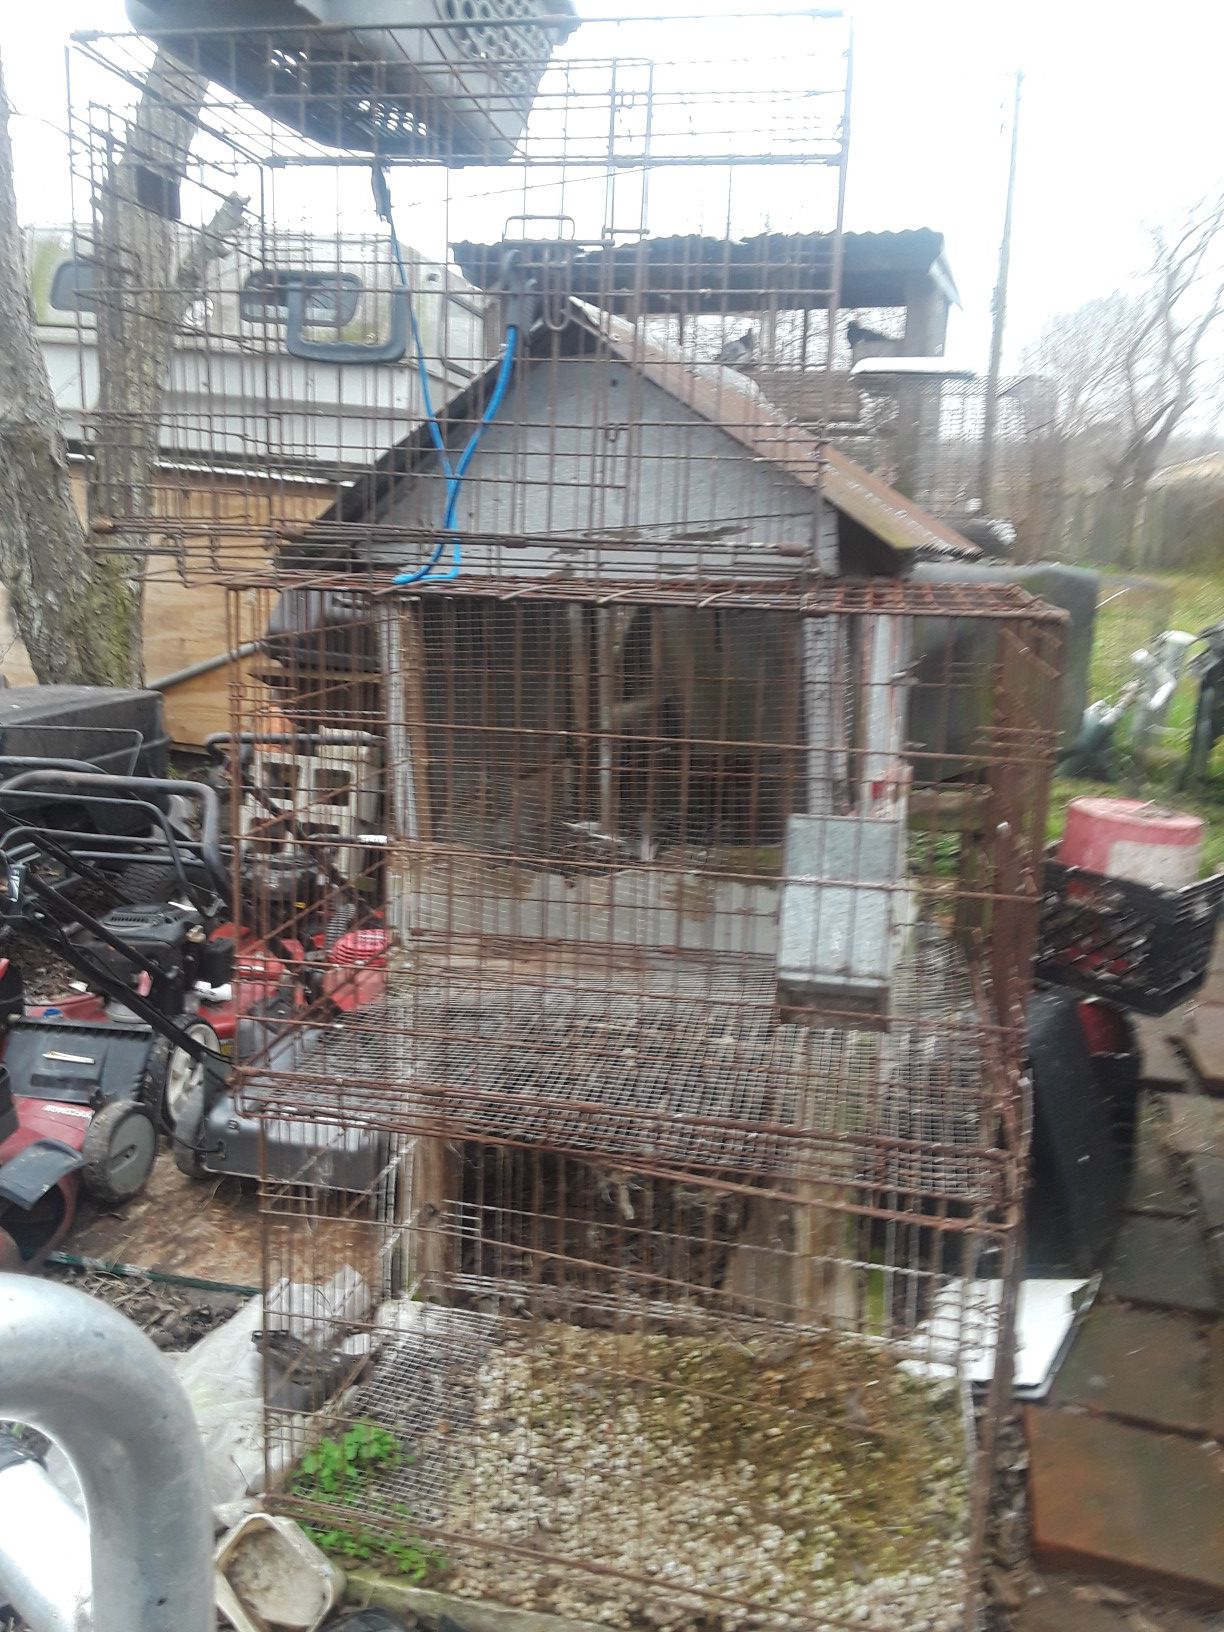 Down sizing metal rabbit,/dog or bird cages